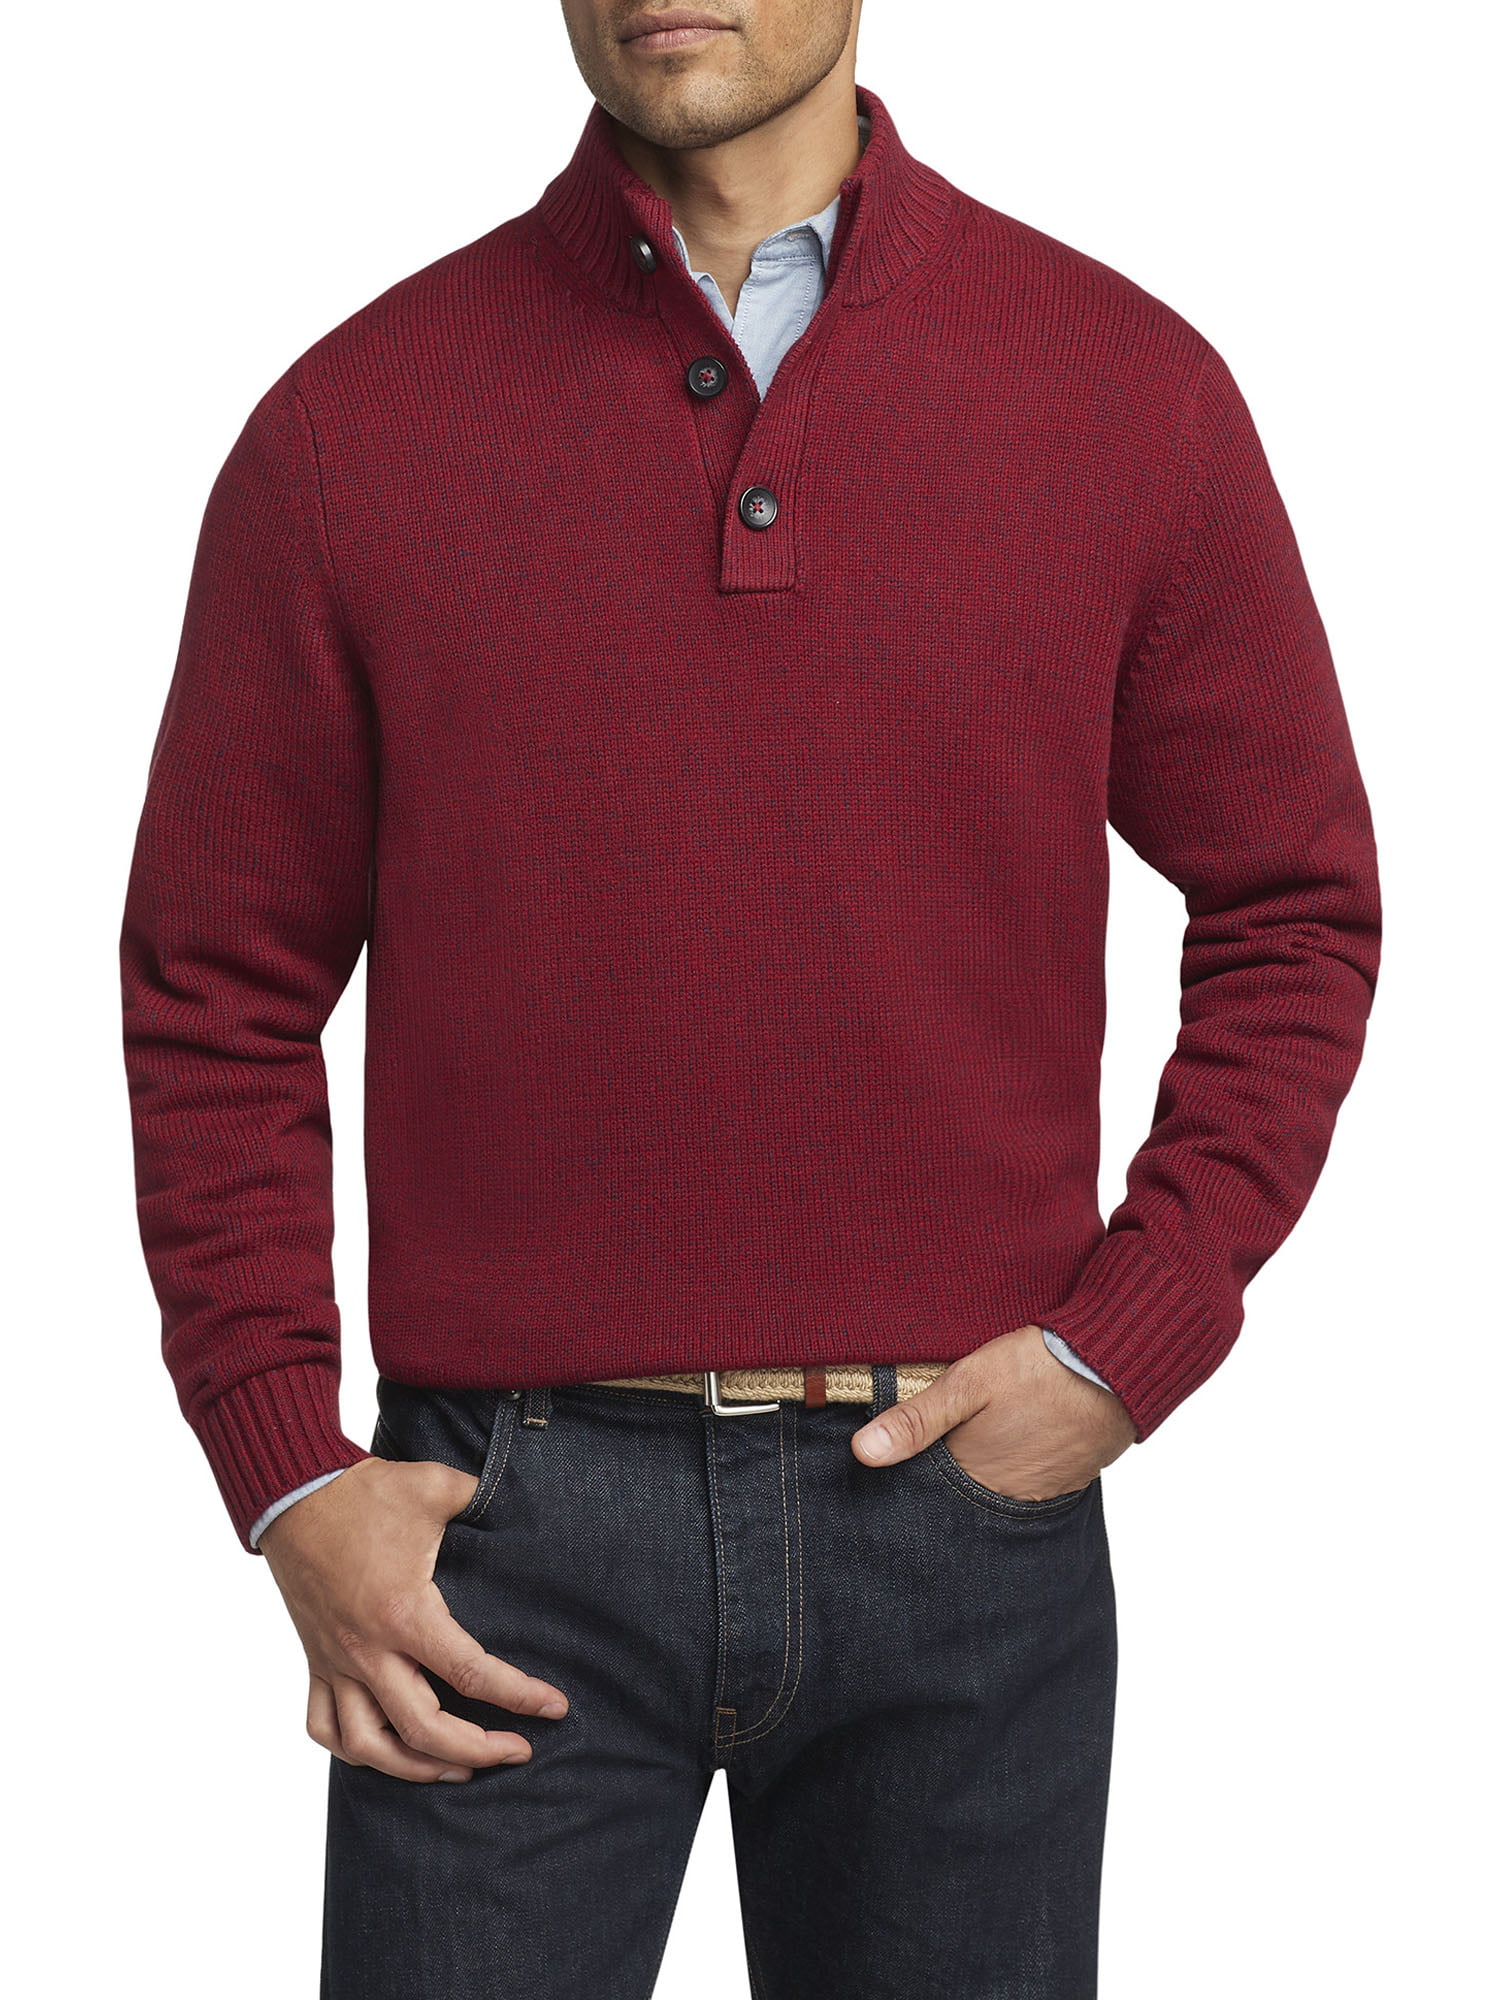 Izod Mens Big and Tall Saltwater Long Sleeve 1/4 Zip Mock Neck Solid Sweater Pullover Sweater